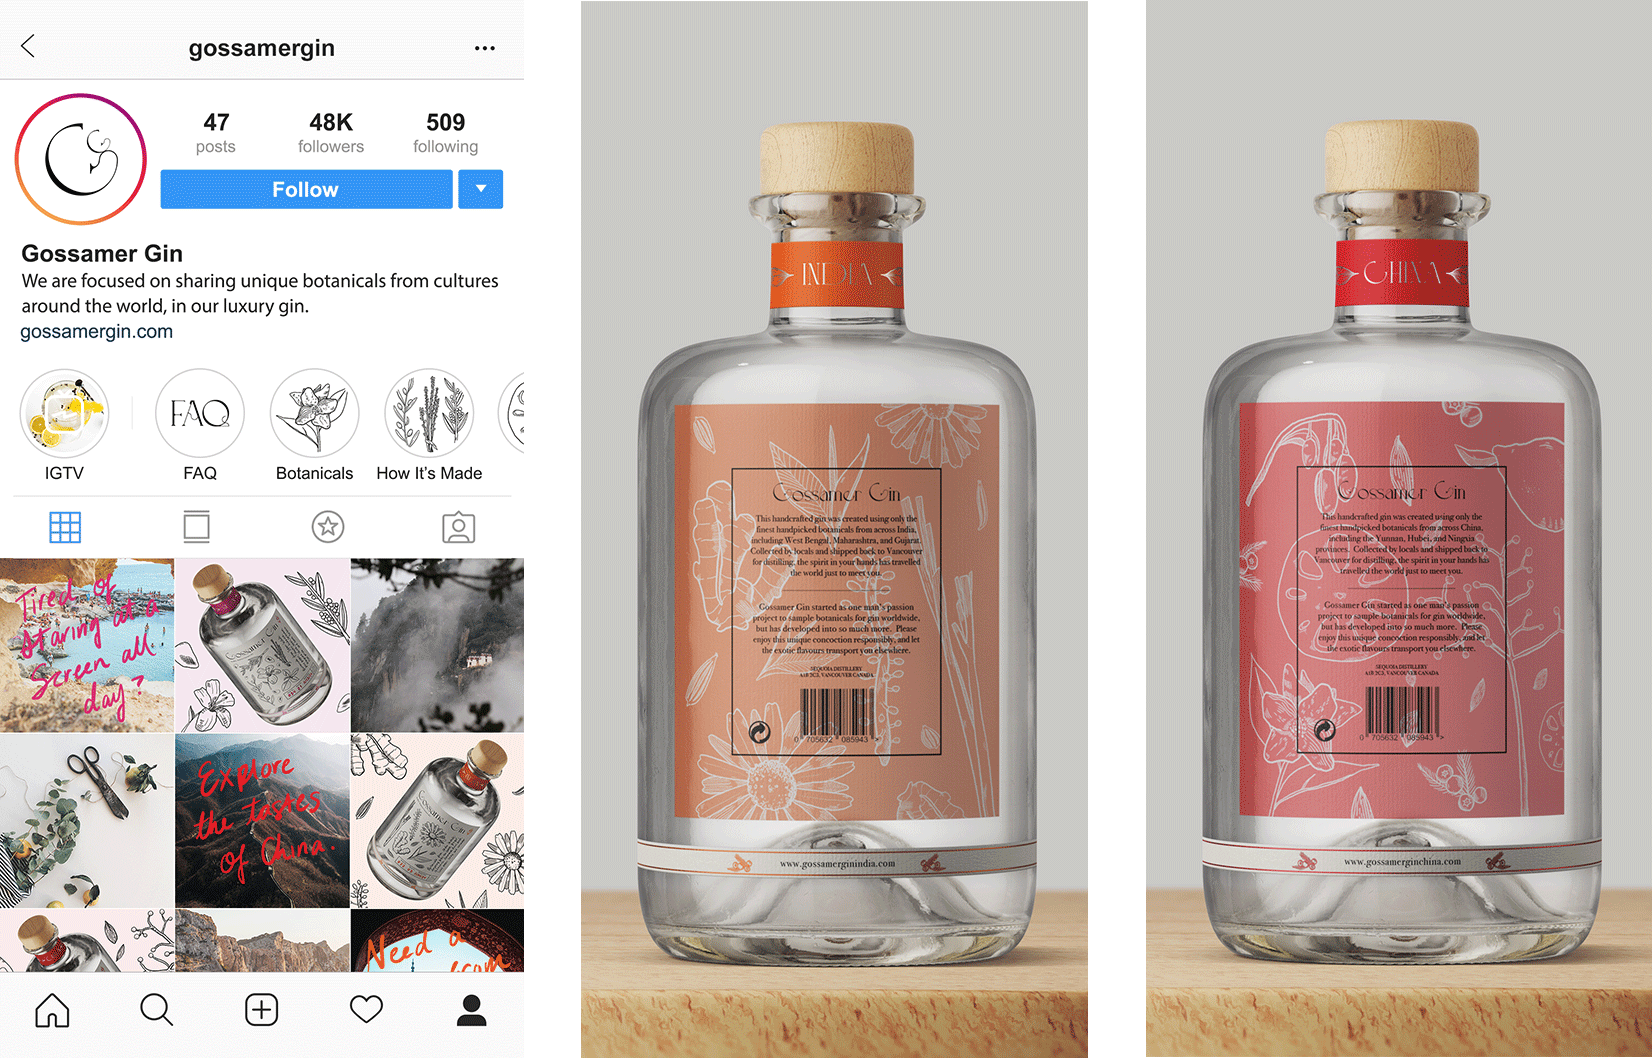 Gossamer Gin instagram page, beside two more images of the back of their gin bottles.